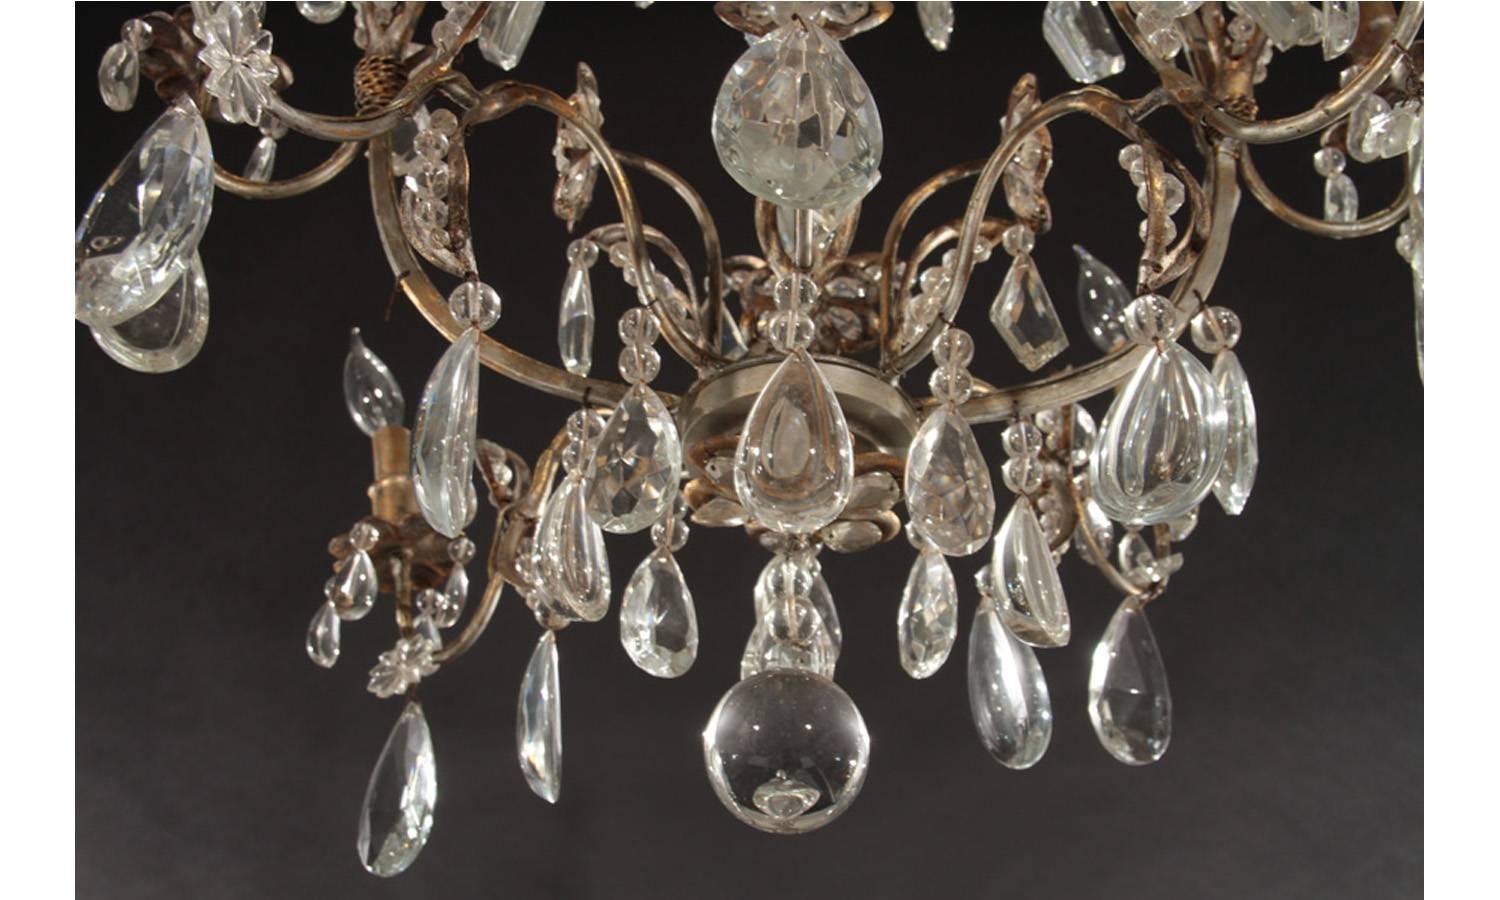 20th Century Hollywood Regency Gilt Decorated Wrought Iron and Crystal Twelve-Arm Chandelier For Sale